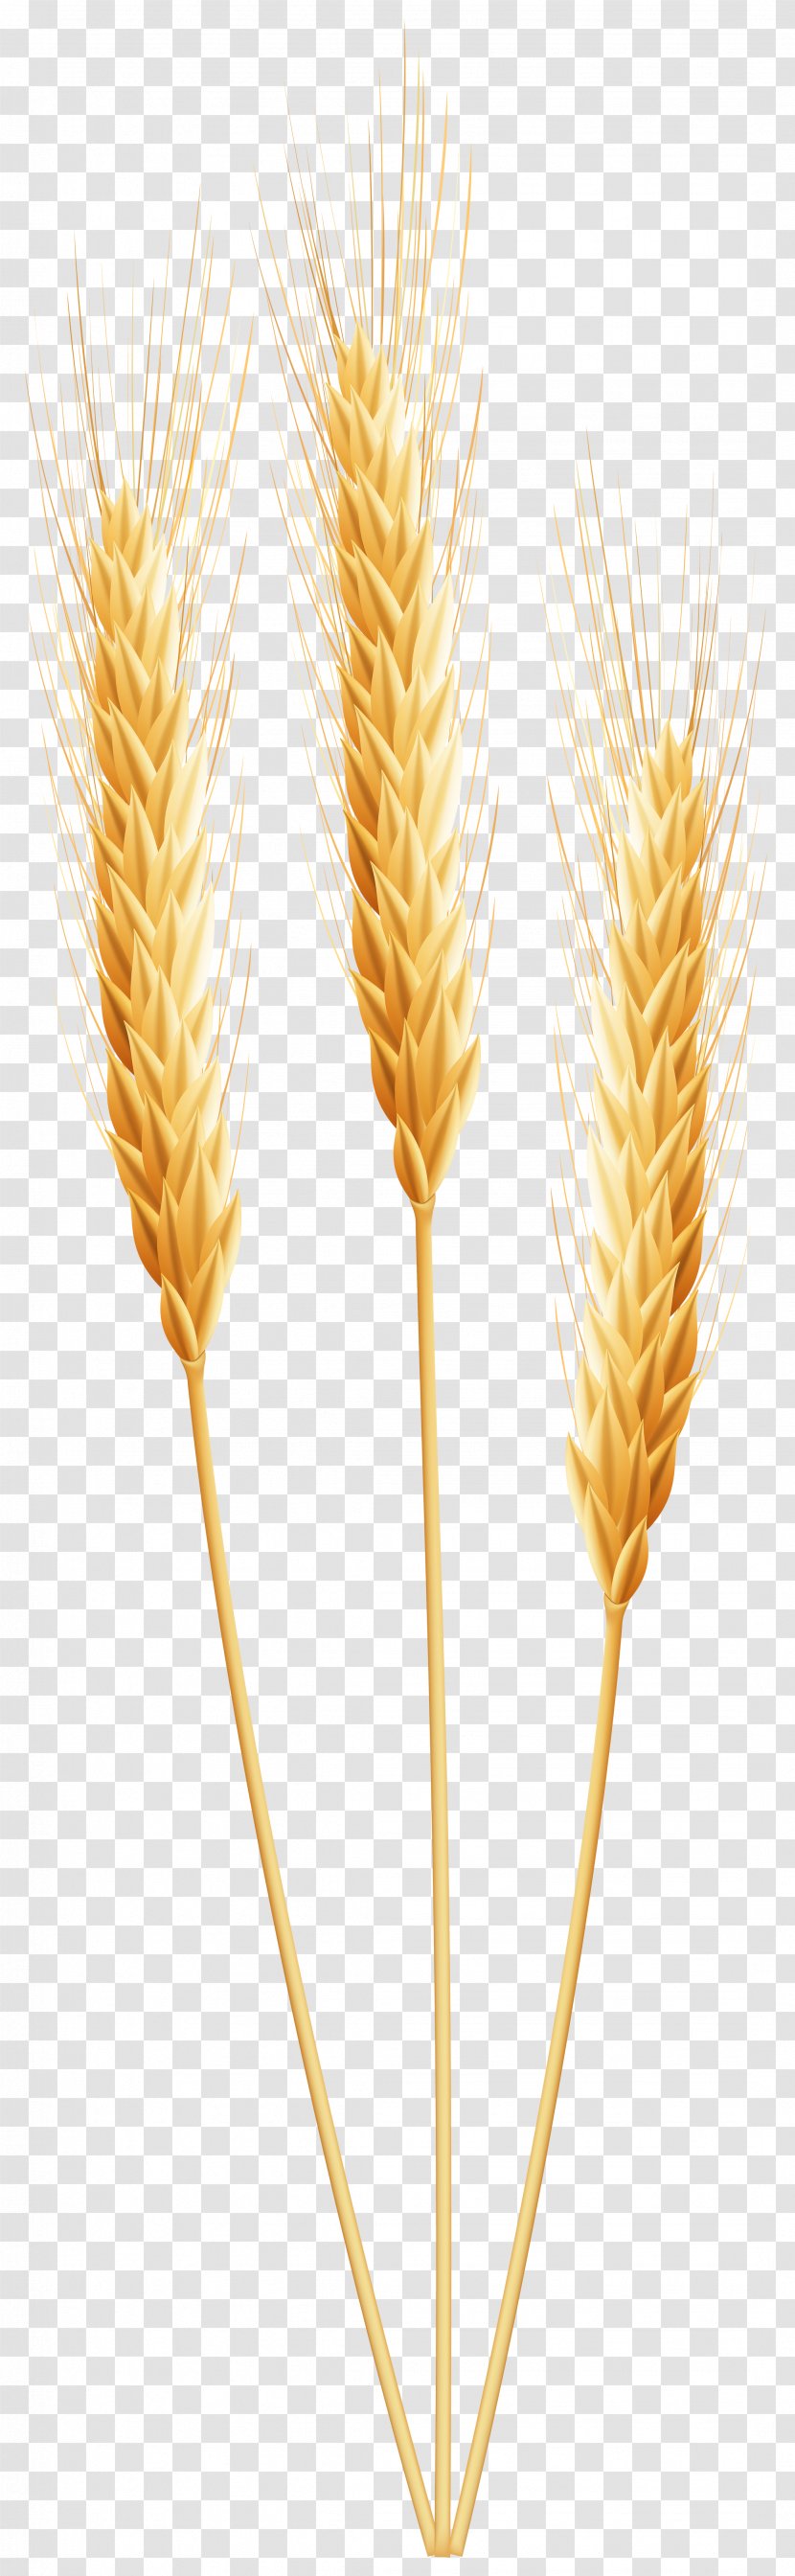 Emmer Cereal Germ - Drawing - Wheat Clip Art Image Transparent PNG